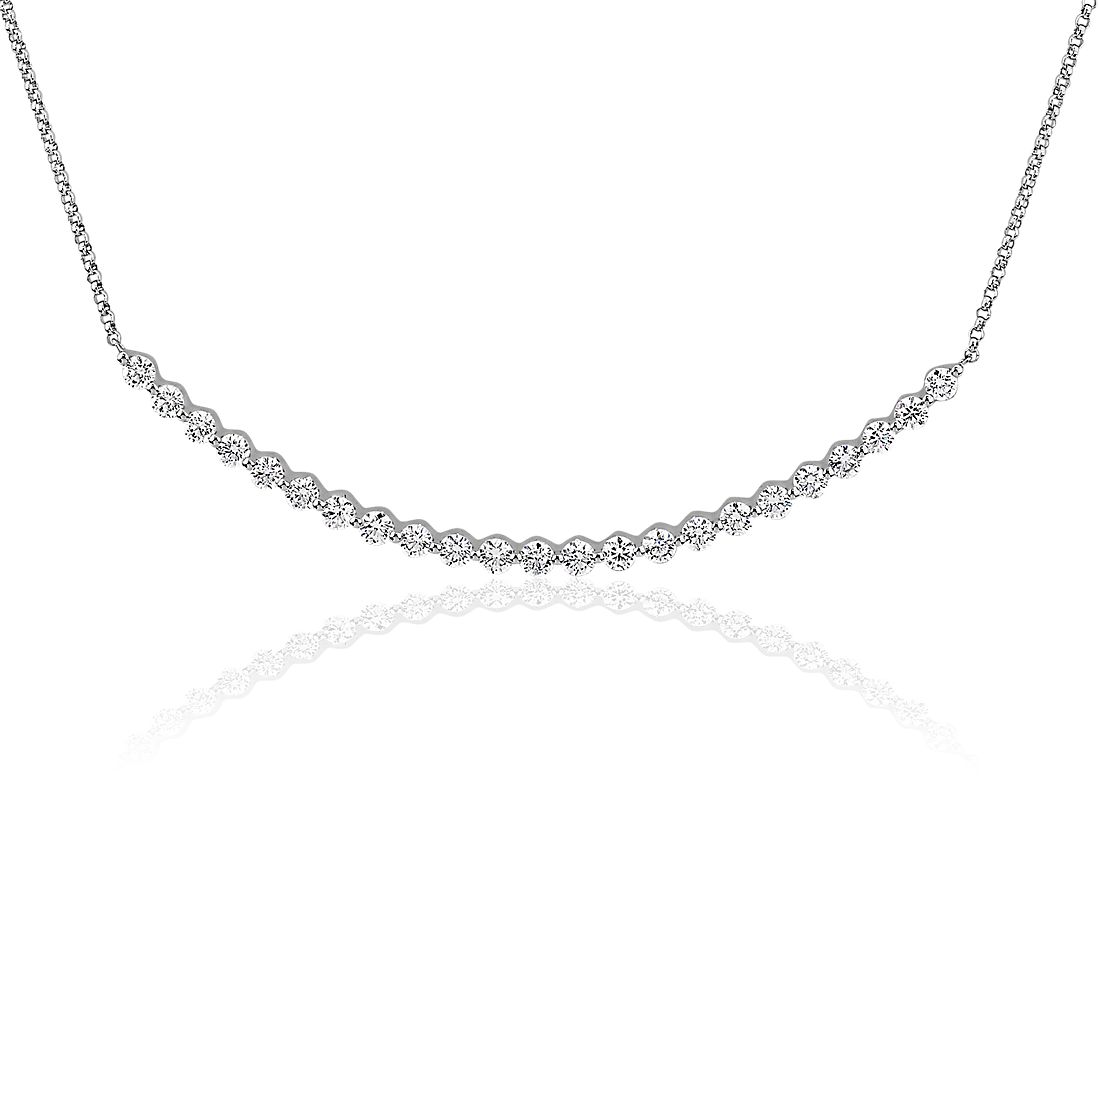 Floating Diamond Smile Necklace in 14k White Gold (1 ct. tw.)